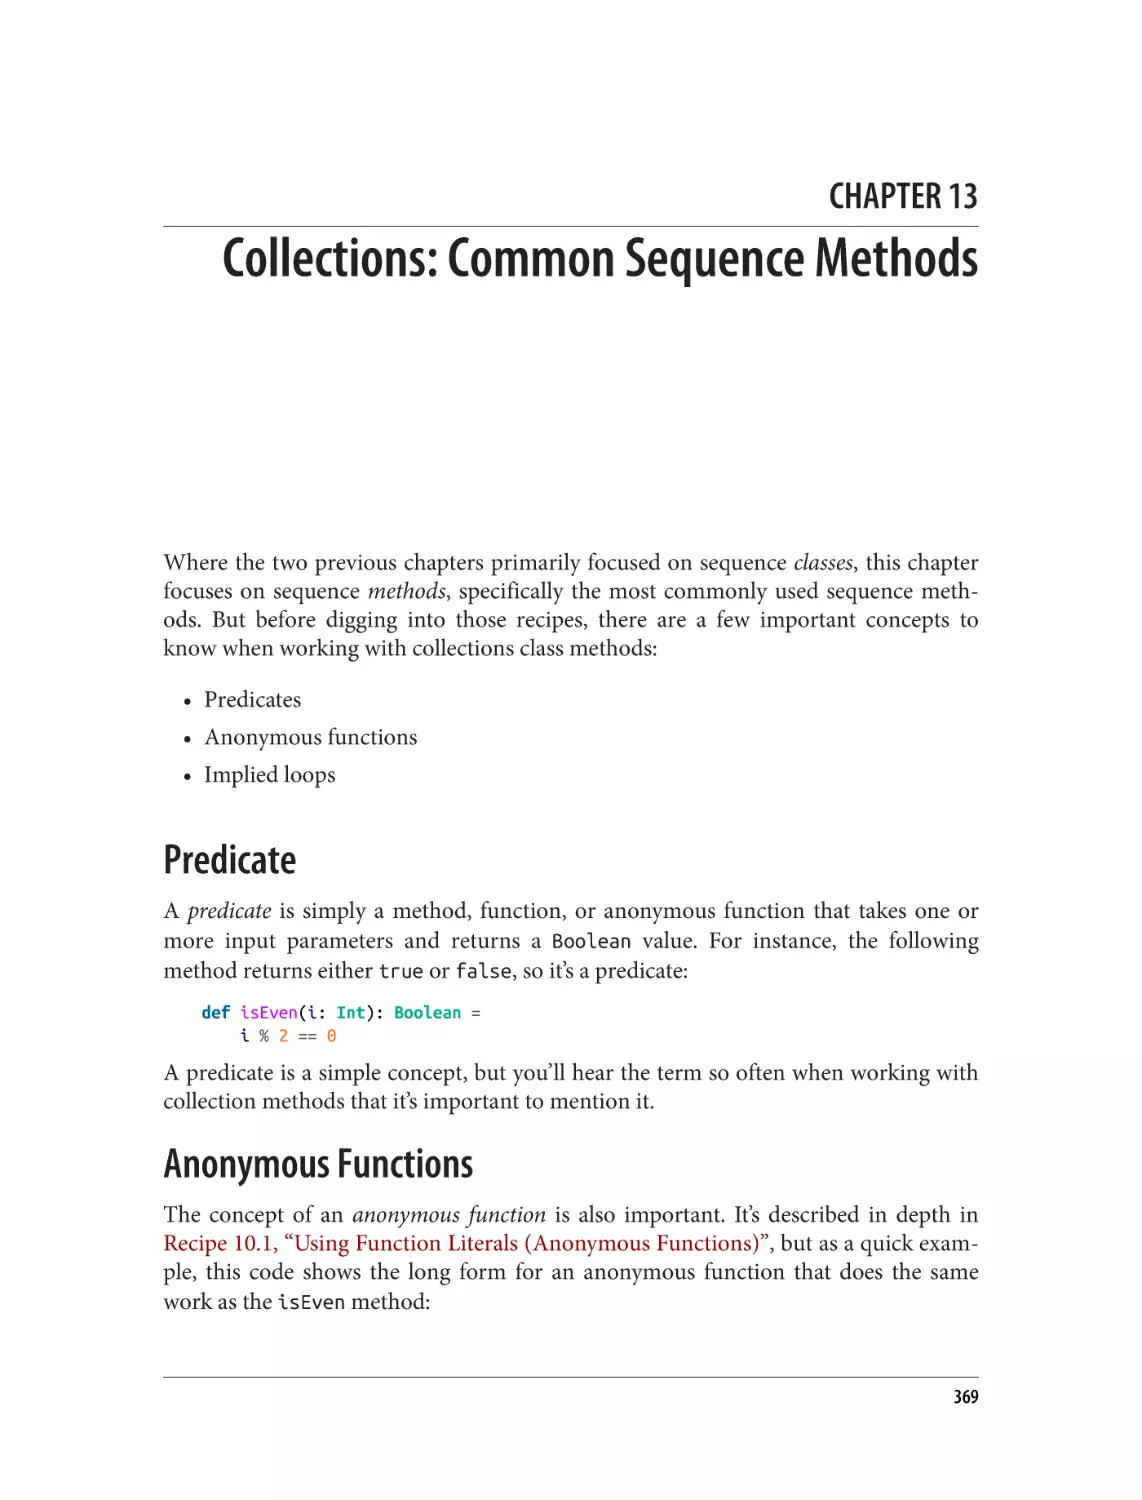 Chapter 13. Collections
Predicate
Anonymous Functions